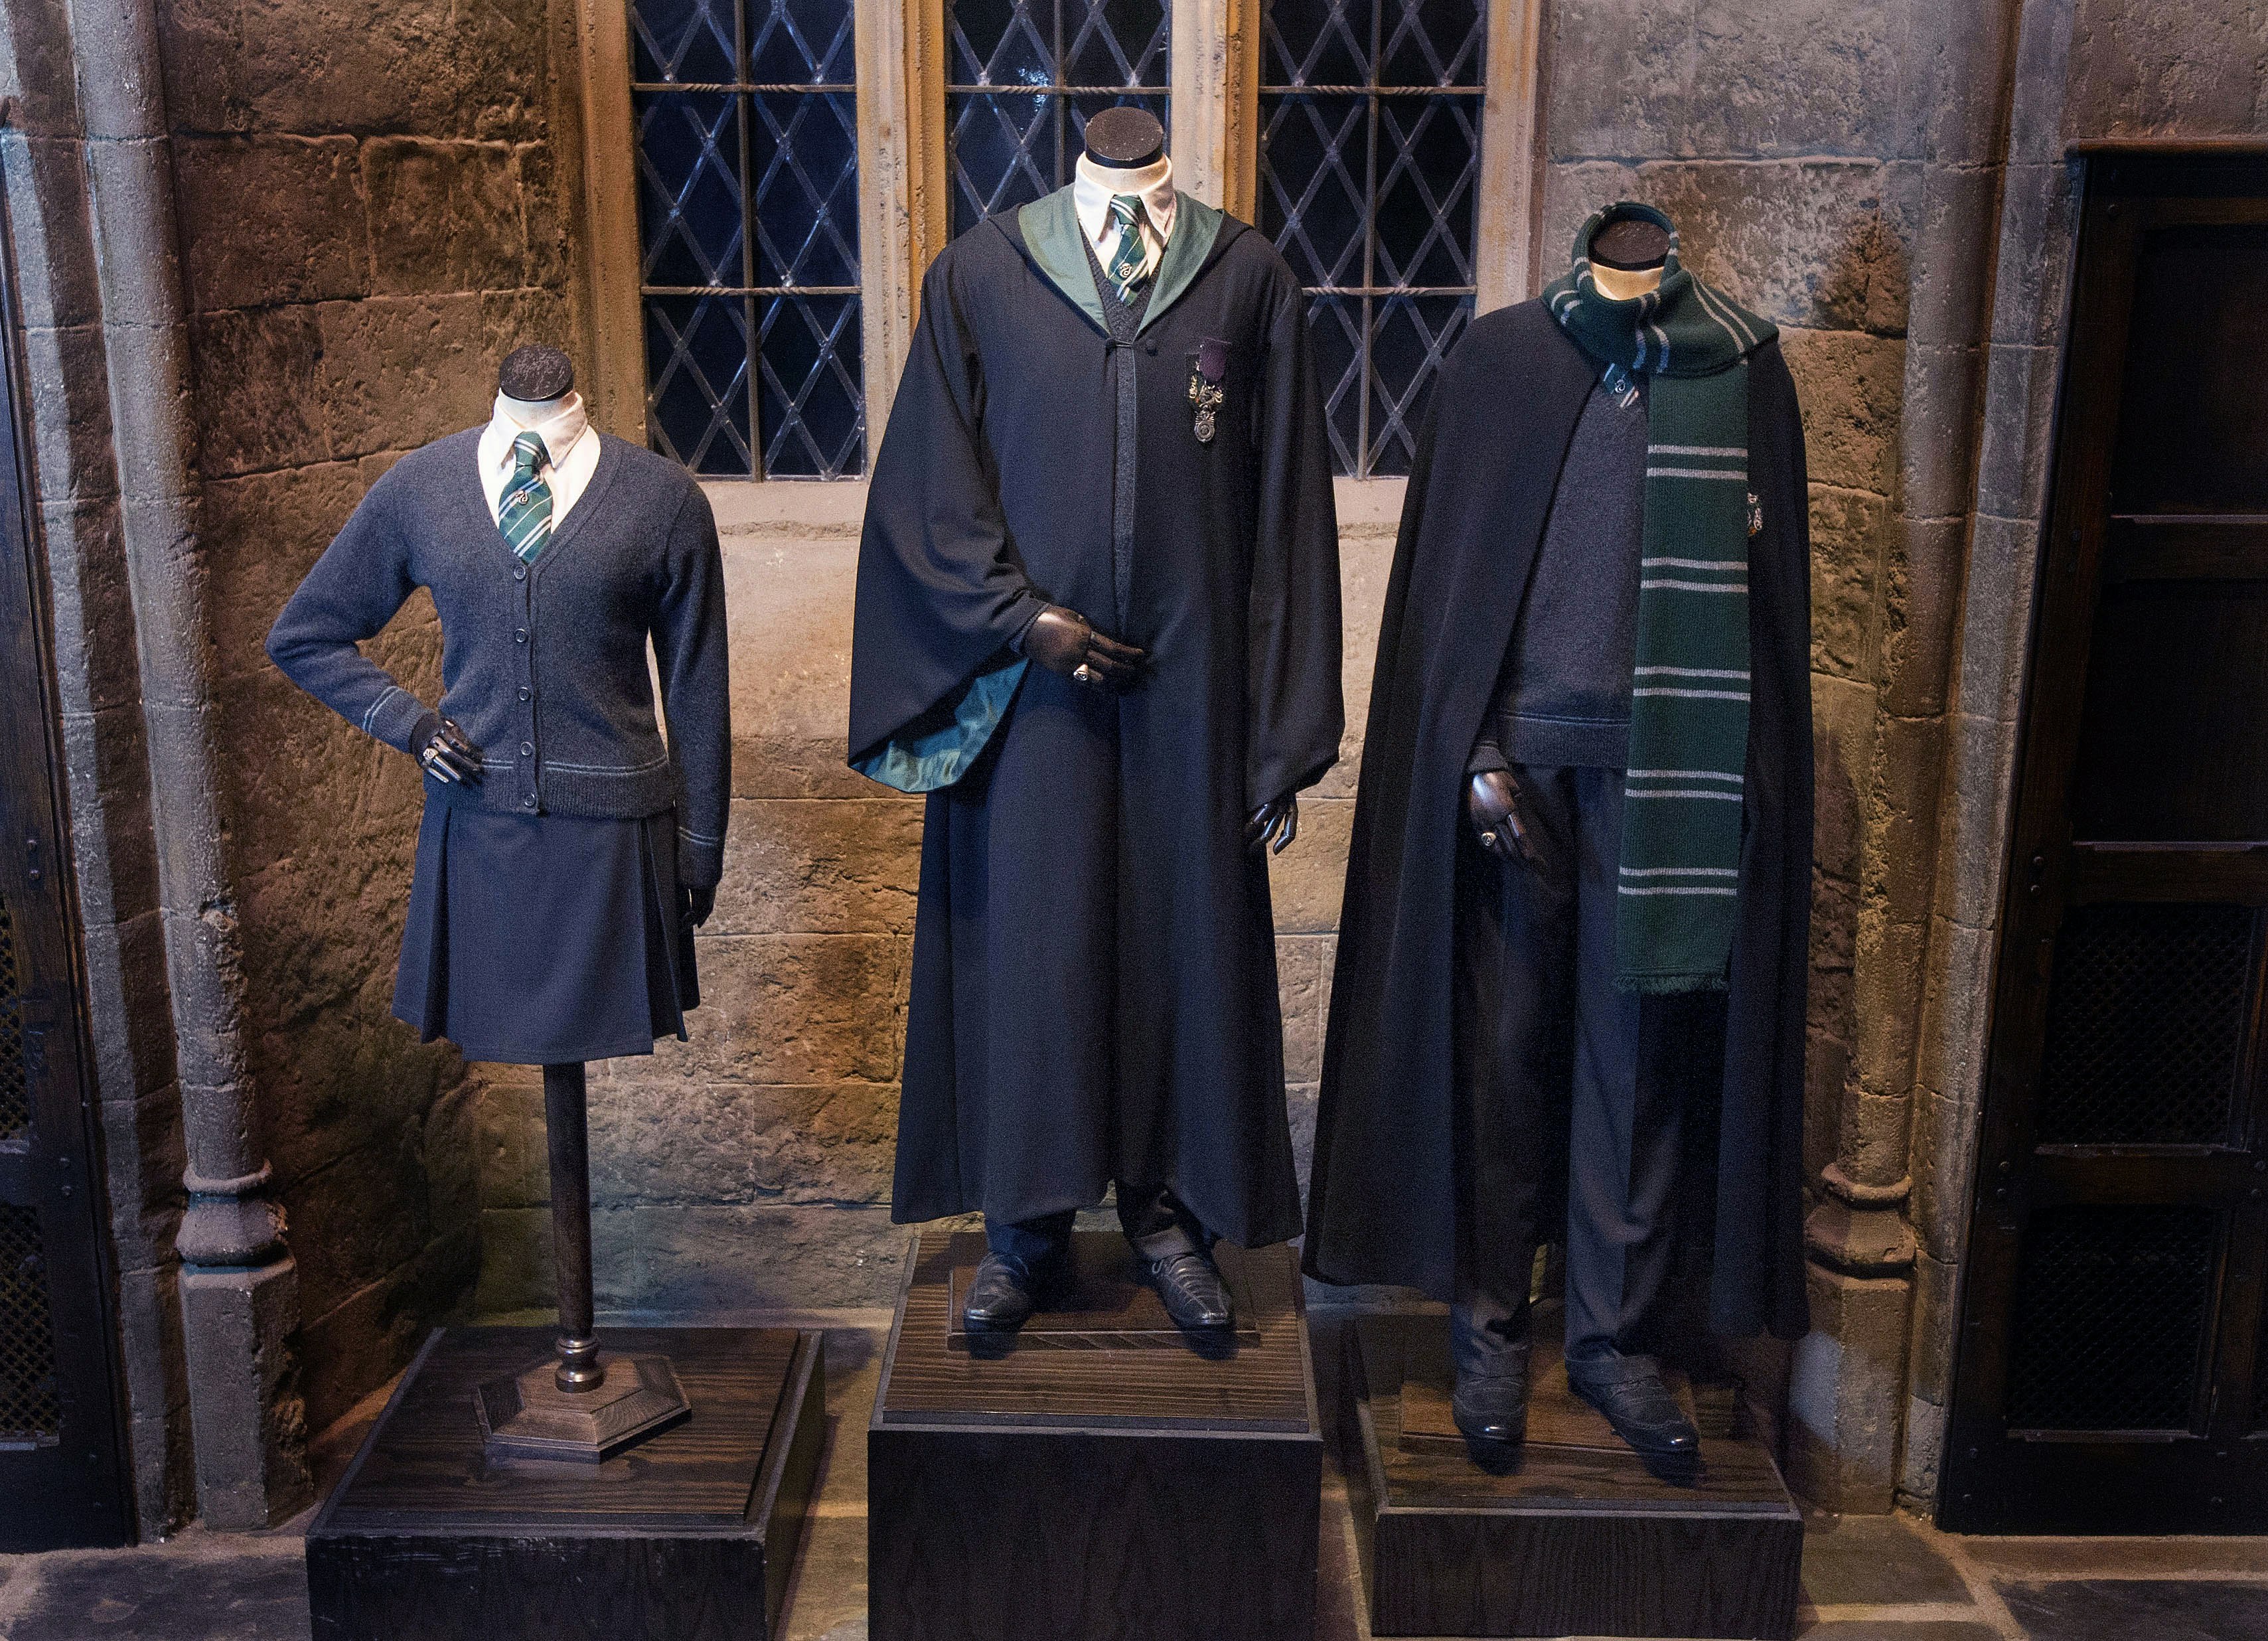 costumes in the Slytherin Great Hall